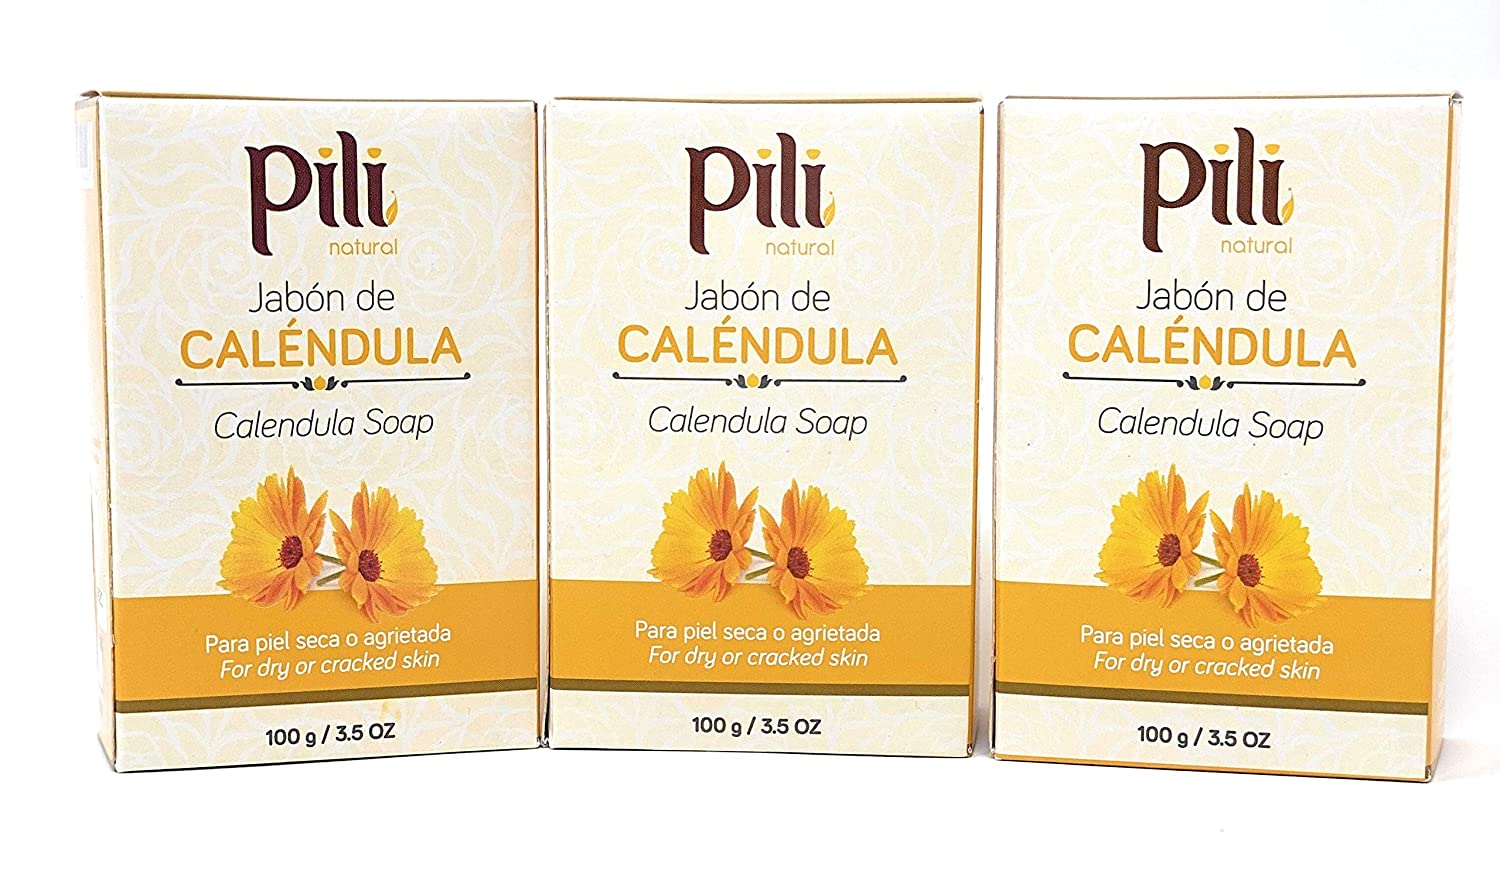 Pili Natural Calendula Soap Bars (3 Pack). Face and Body Soap Bars. For dry or cracked skin. For Men, Women and Teens.